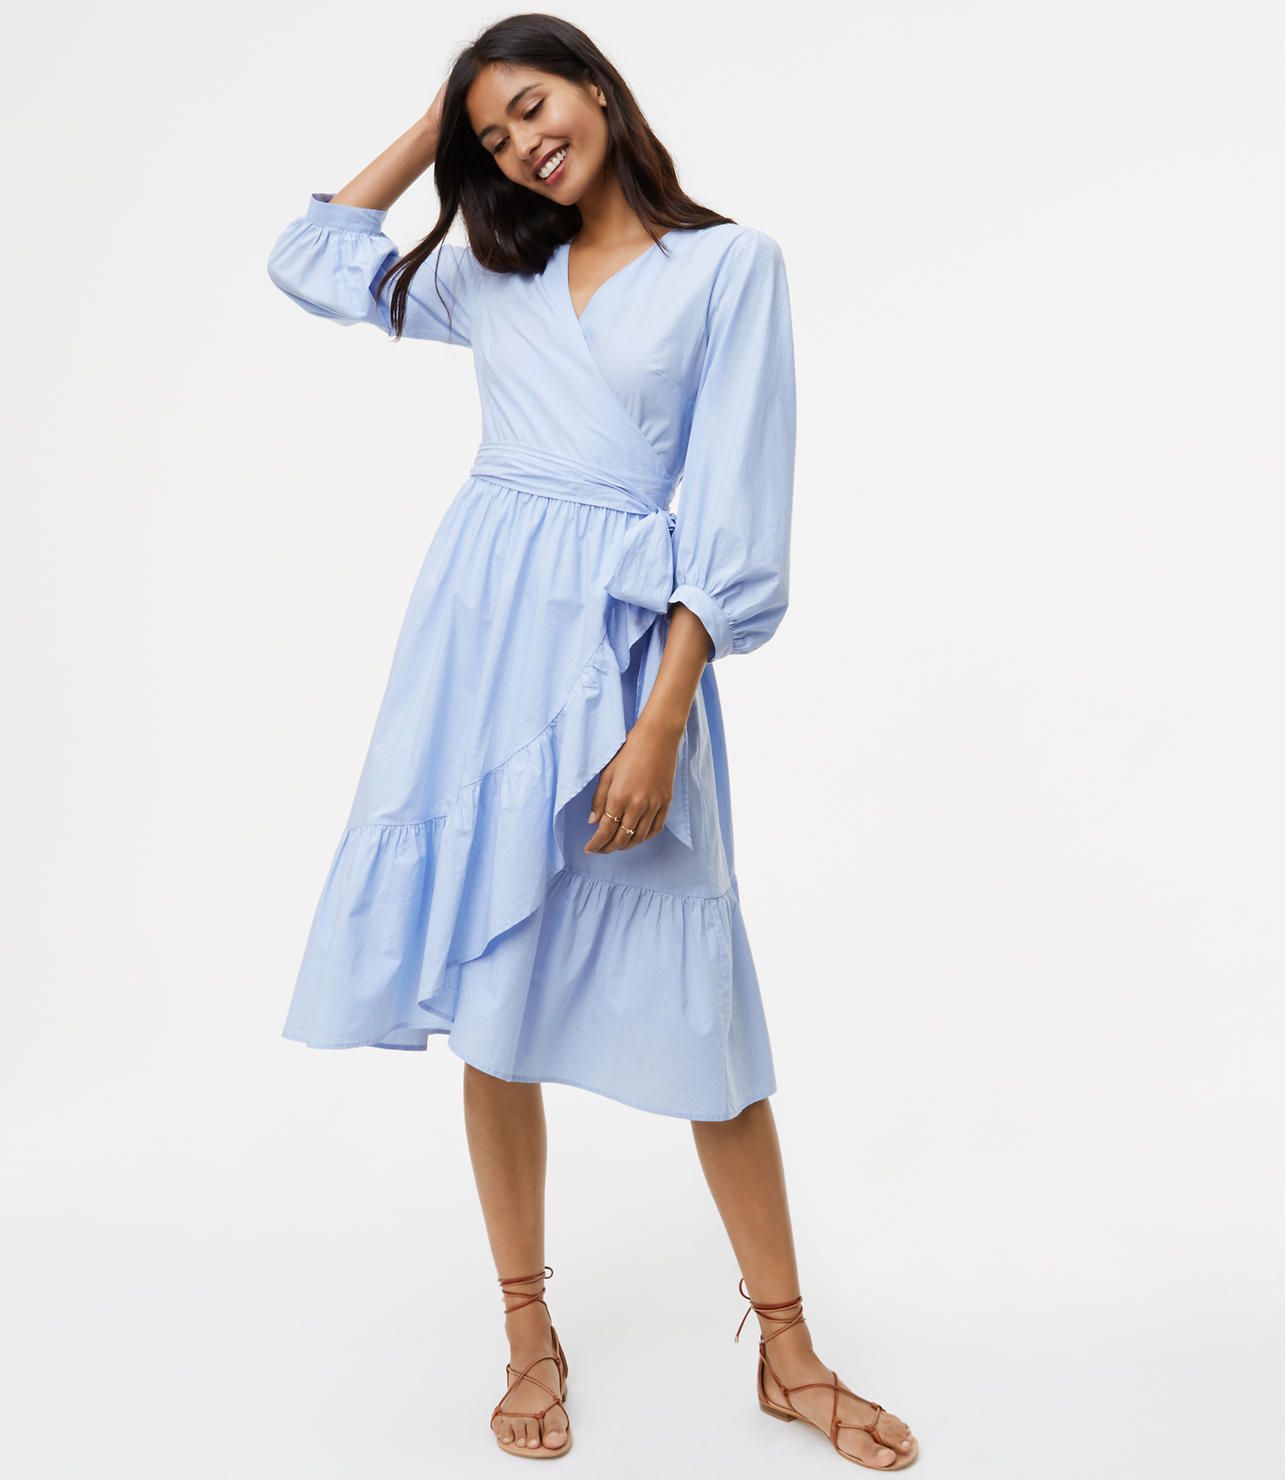 22 dresses to buy now that summer clothing is on sale